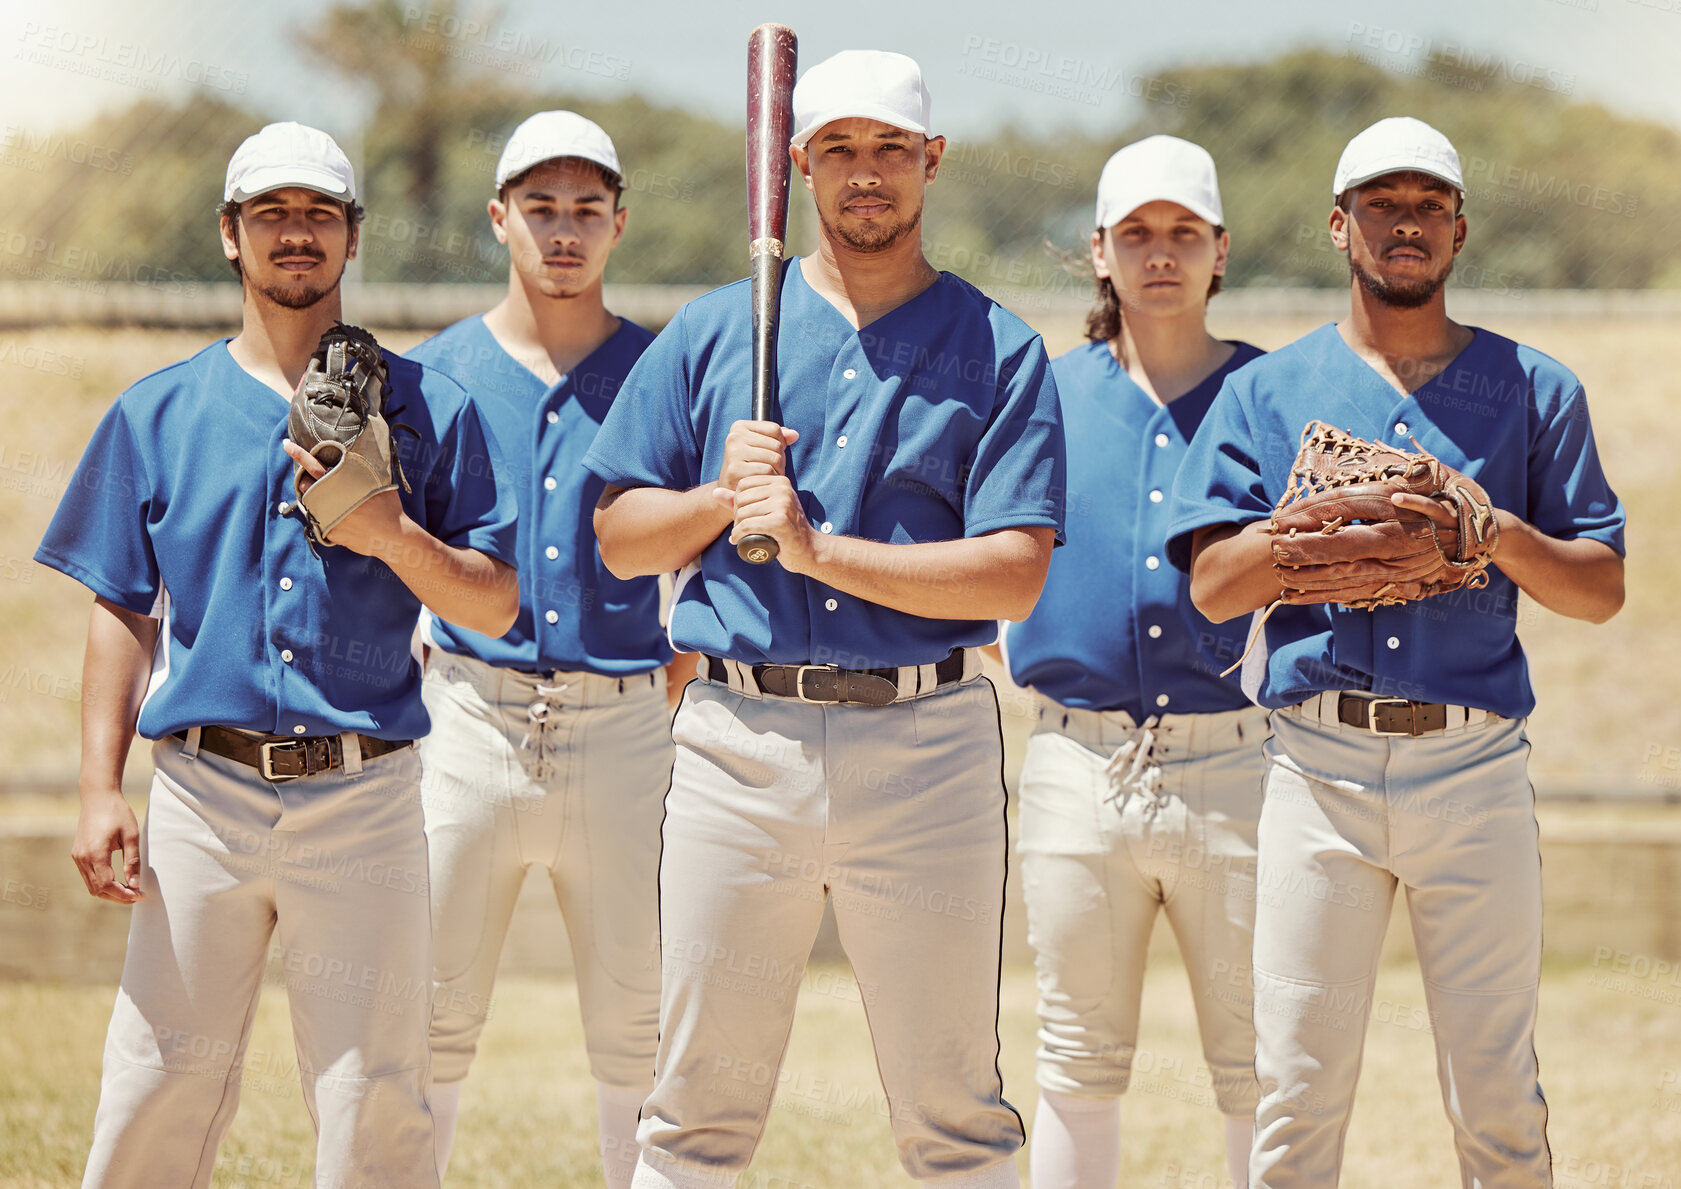 Buy stock photo Sports, team and baseball portrait by sport people standing in power, support and fitness training on baseball field. Softball, diversity and inclusive team sport by united group ready for challenge